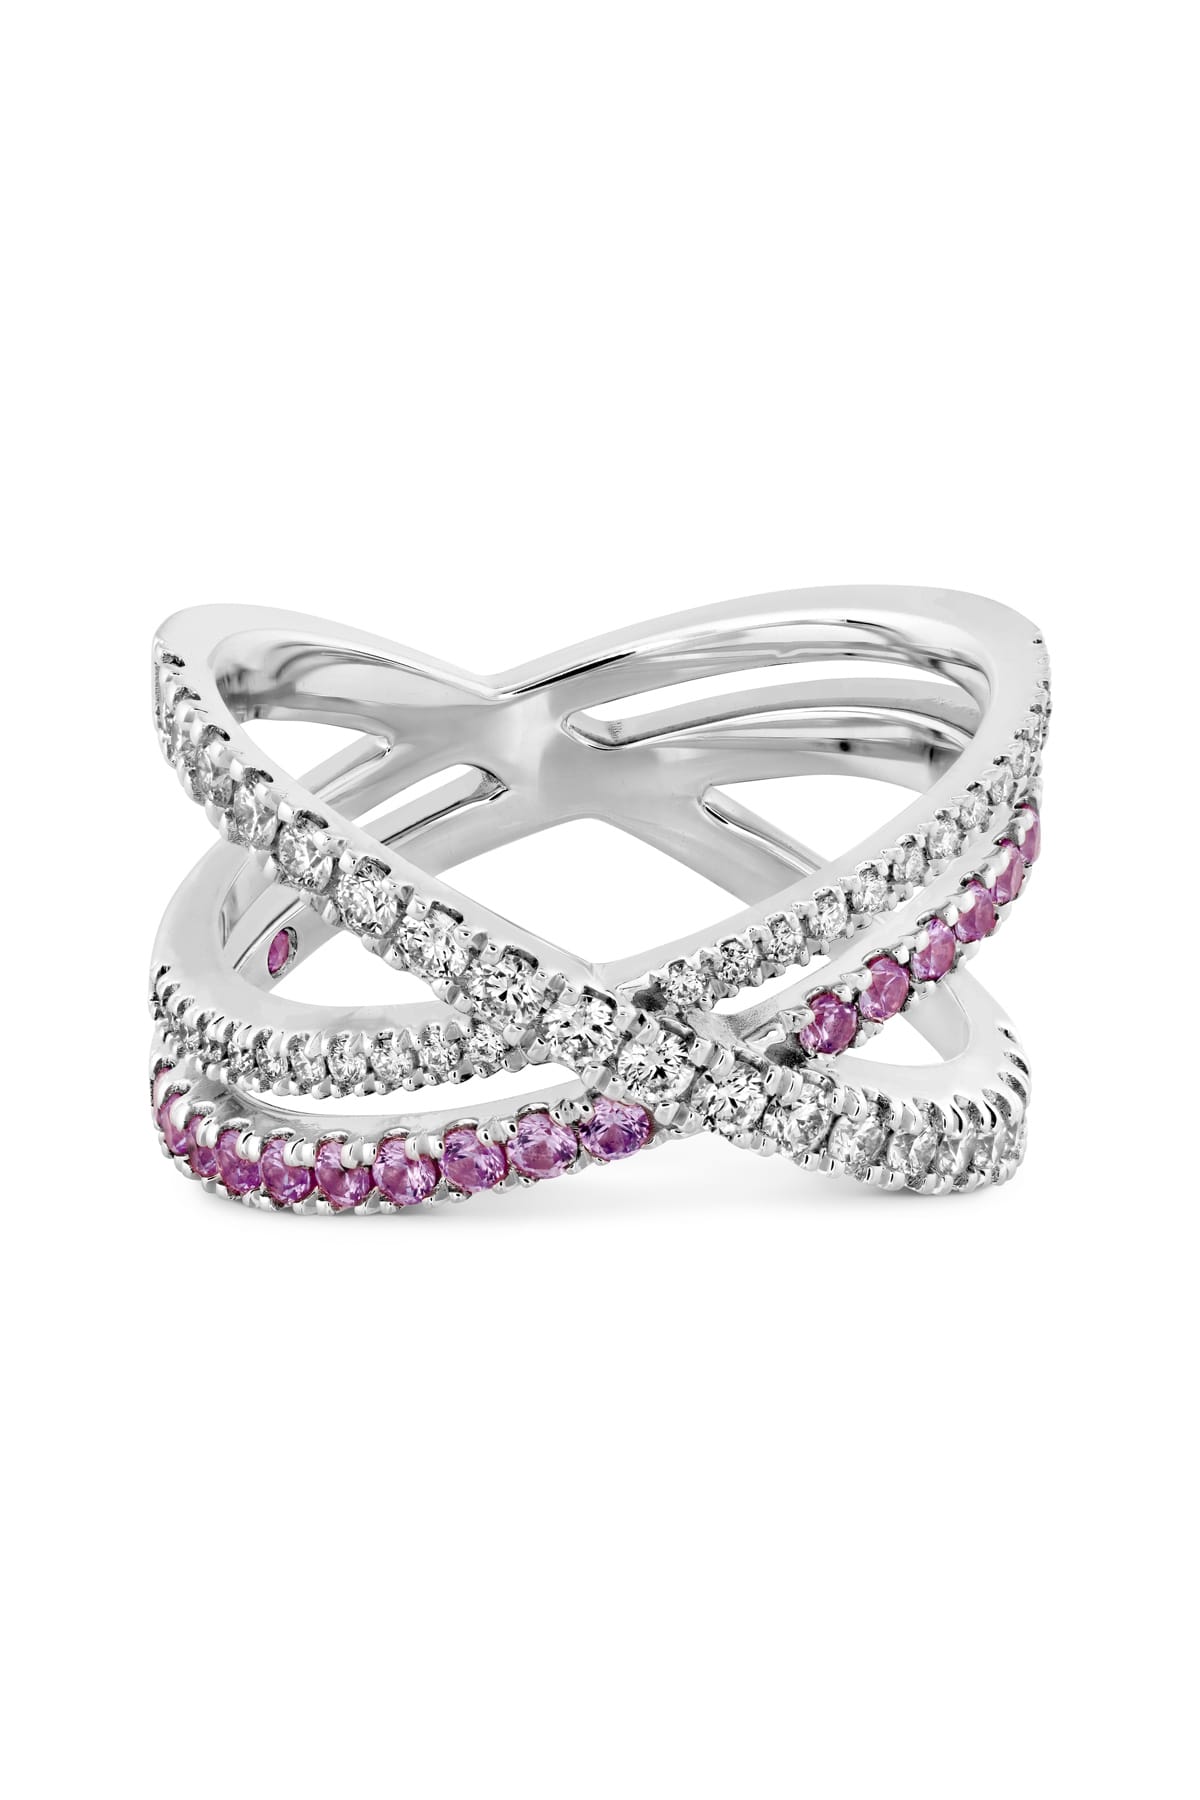 Harley Wrap Power Band With Sapphires From Hearts On Fire available at LeGassick Diamonds and Jewellery Gold Coast, Australia.